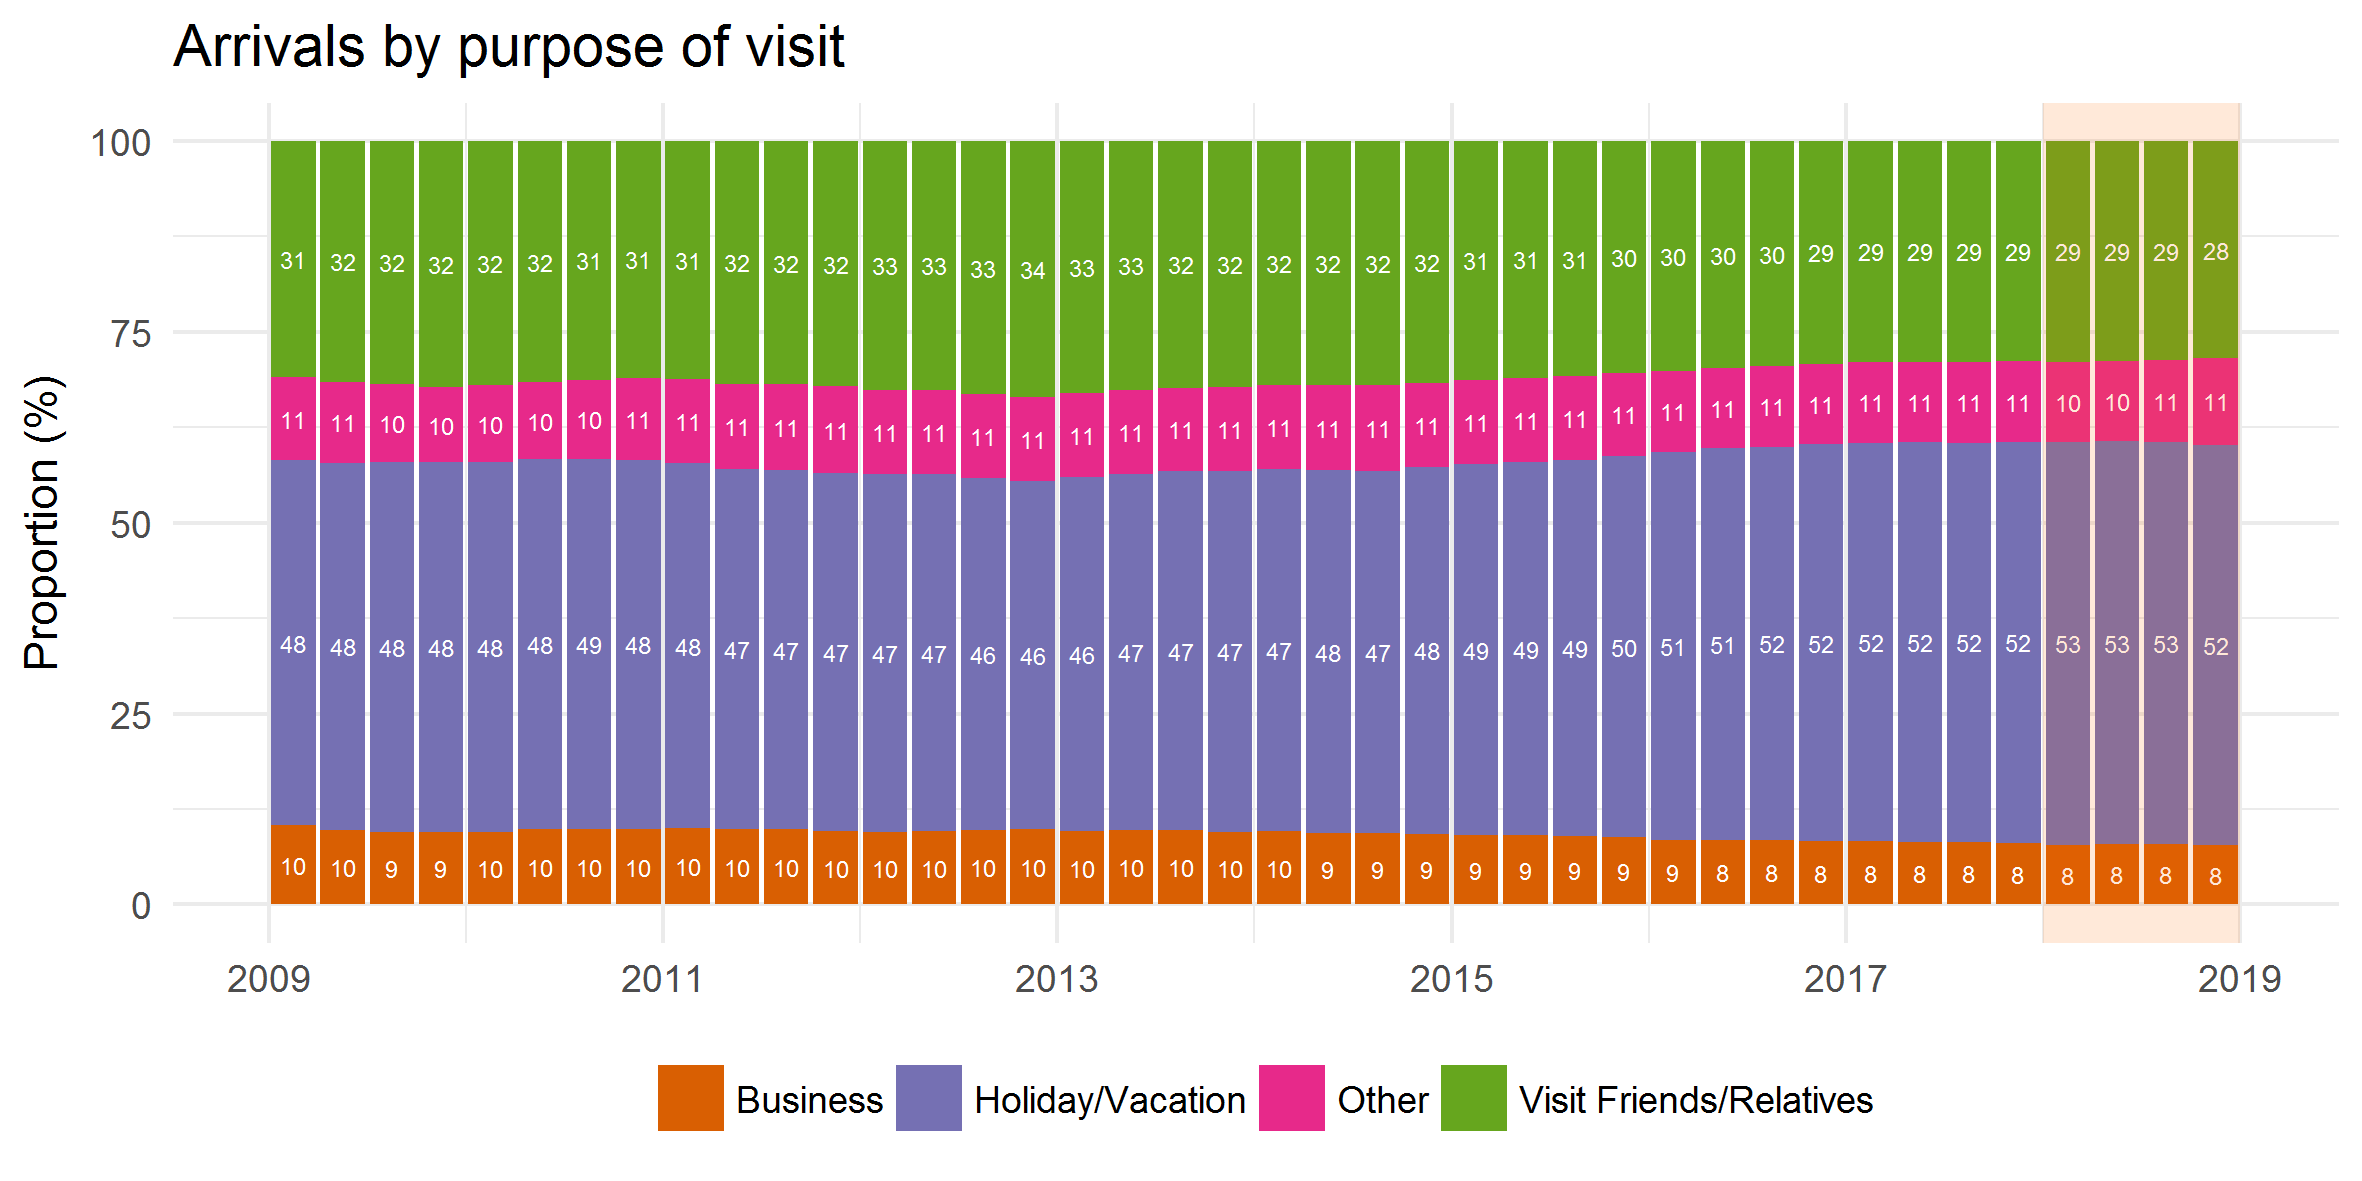 Proportion of arrivals by purpose of visit